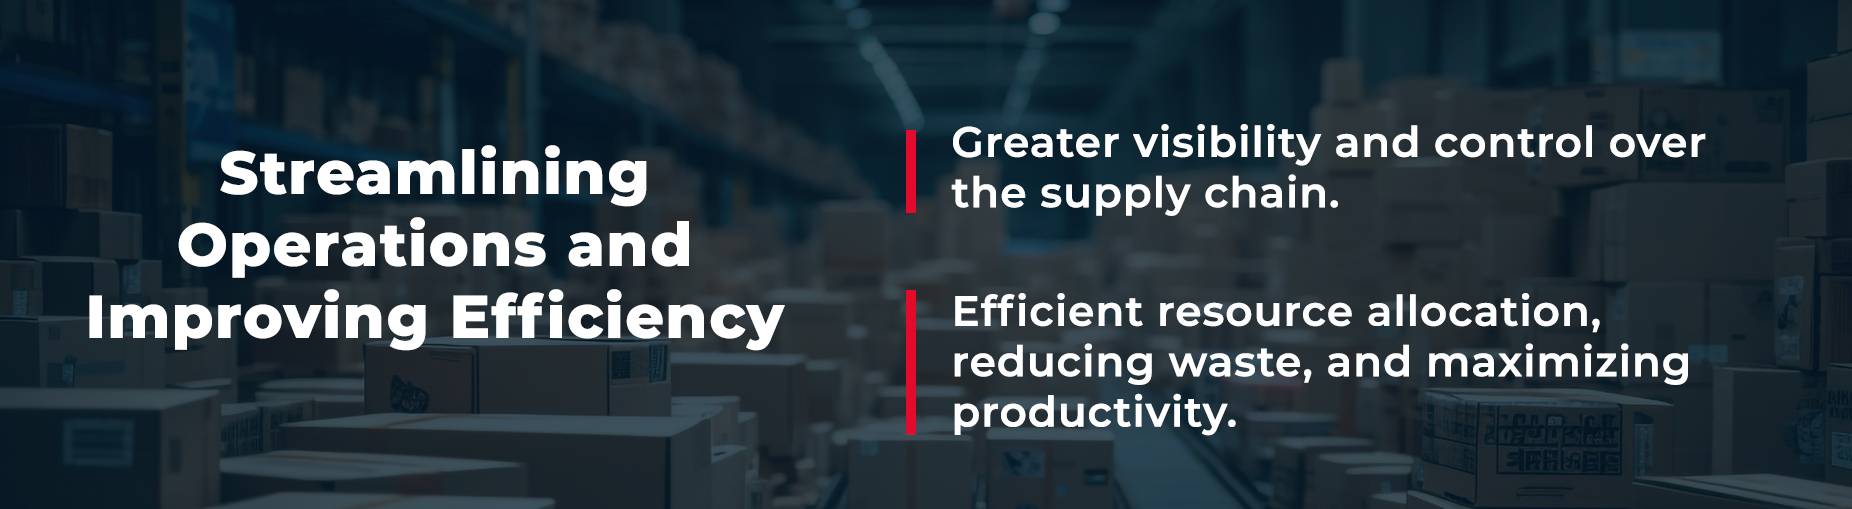 Improving efficiency in Supply Chain